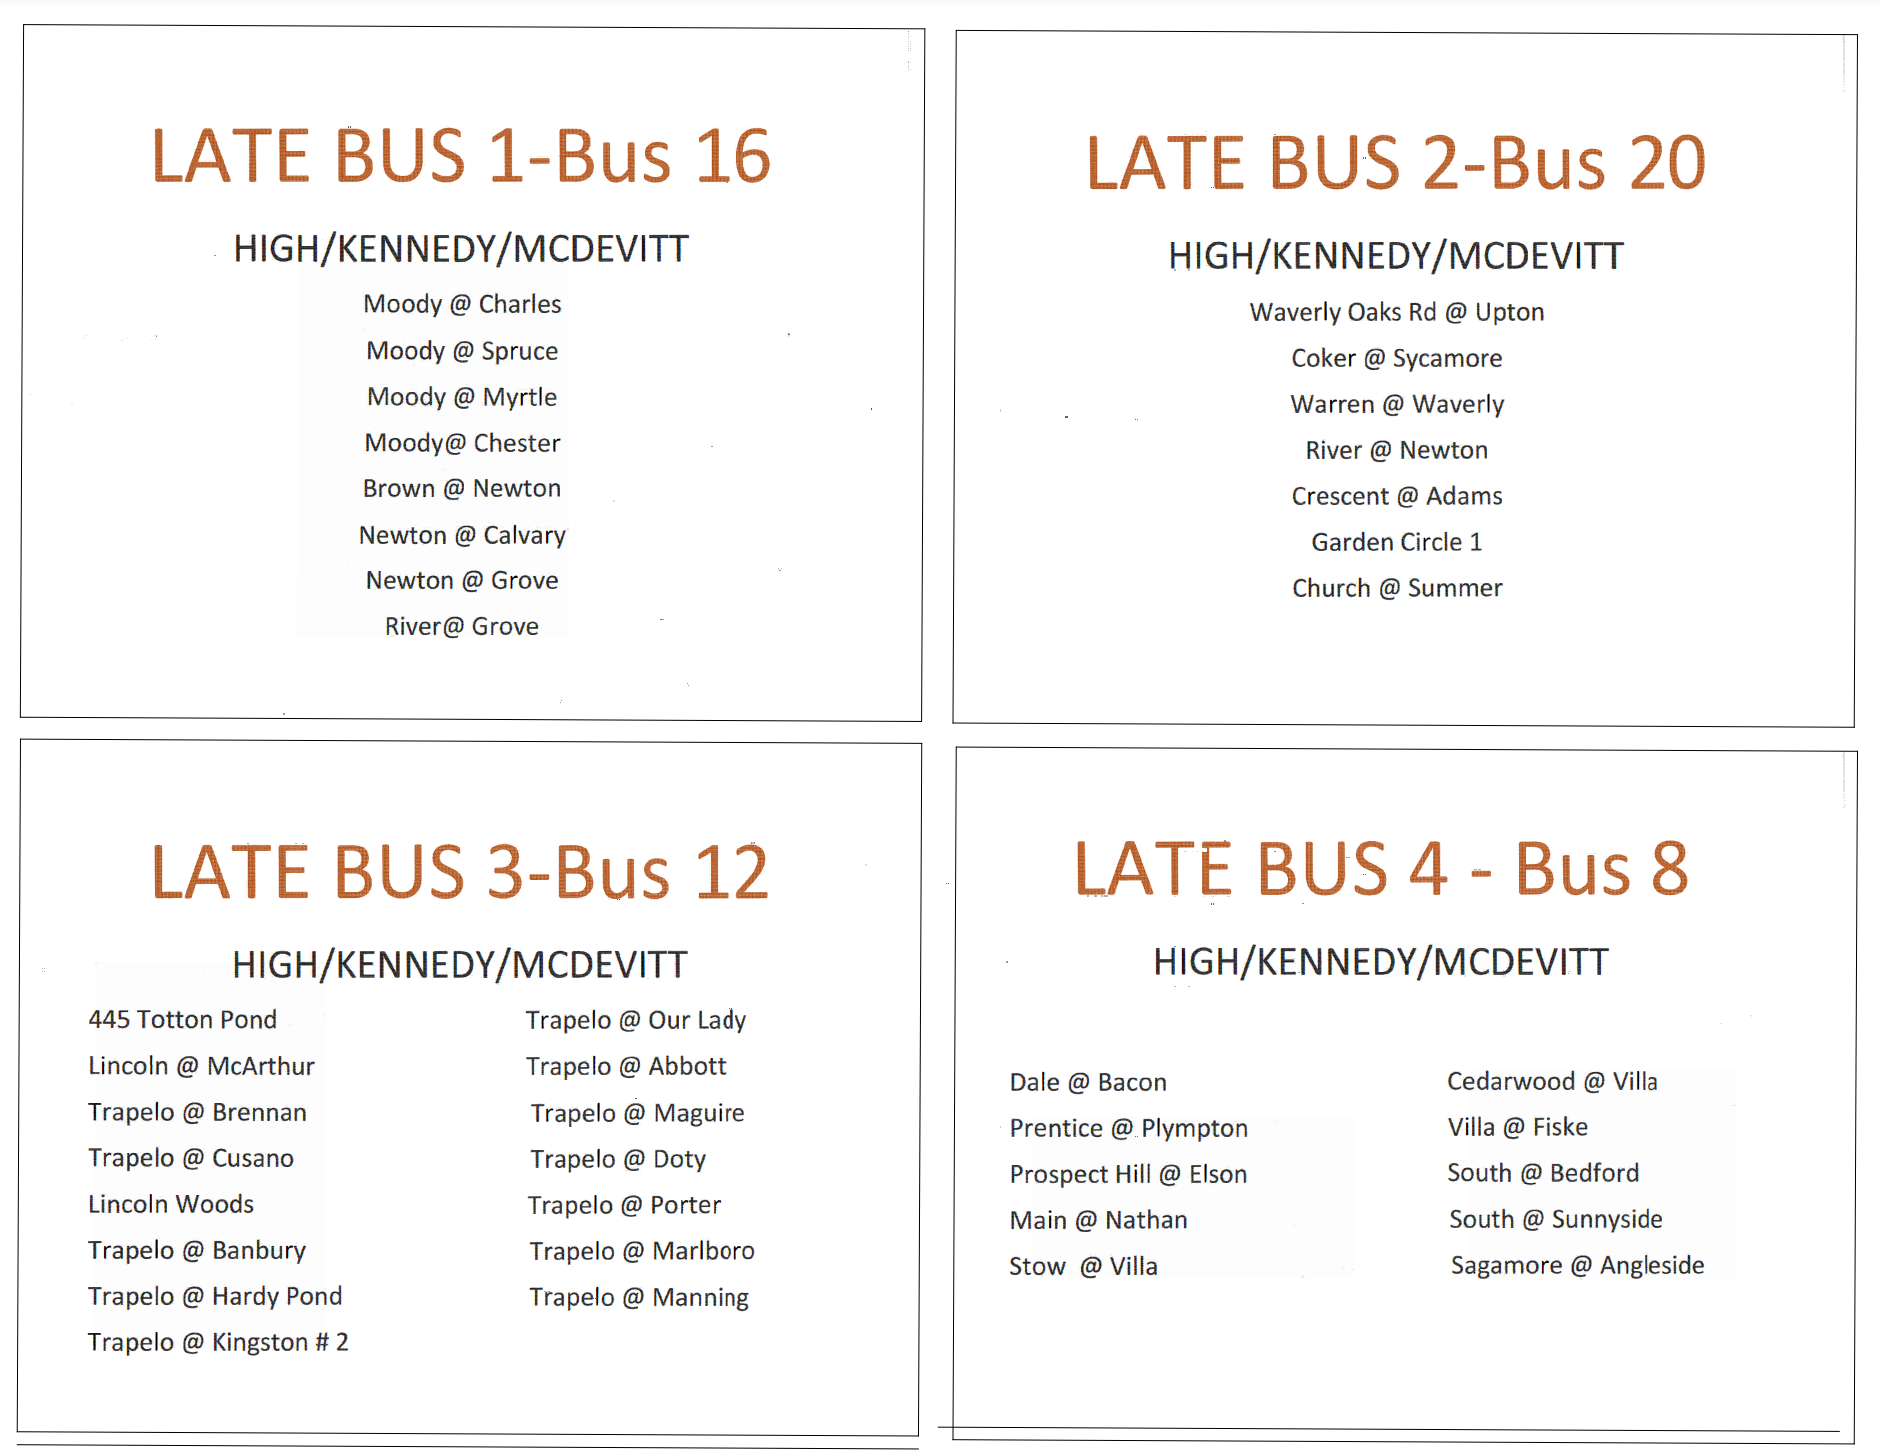 Late Bus Information